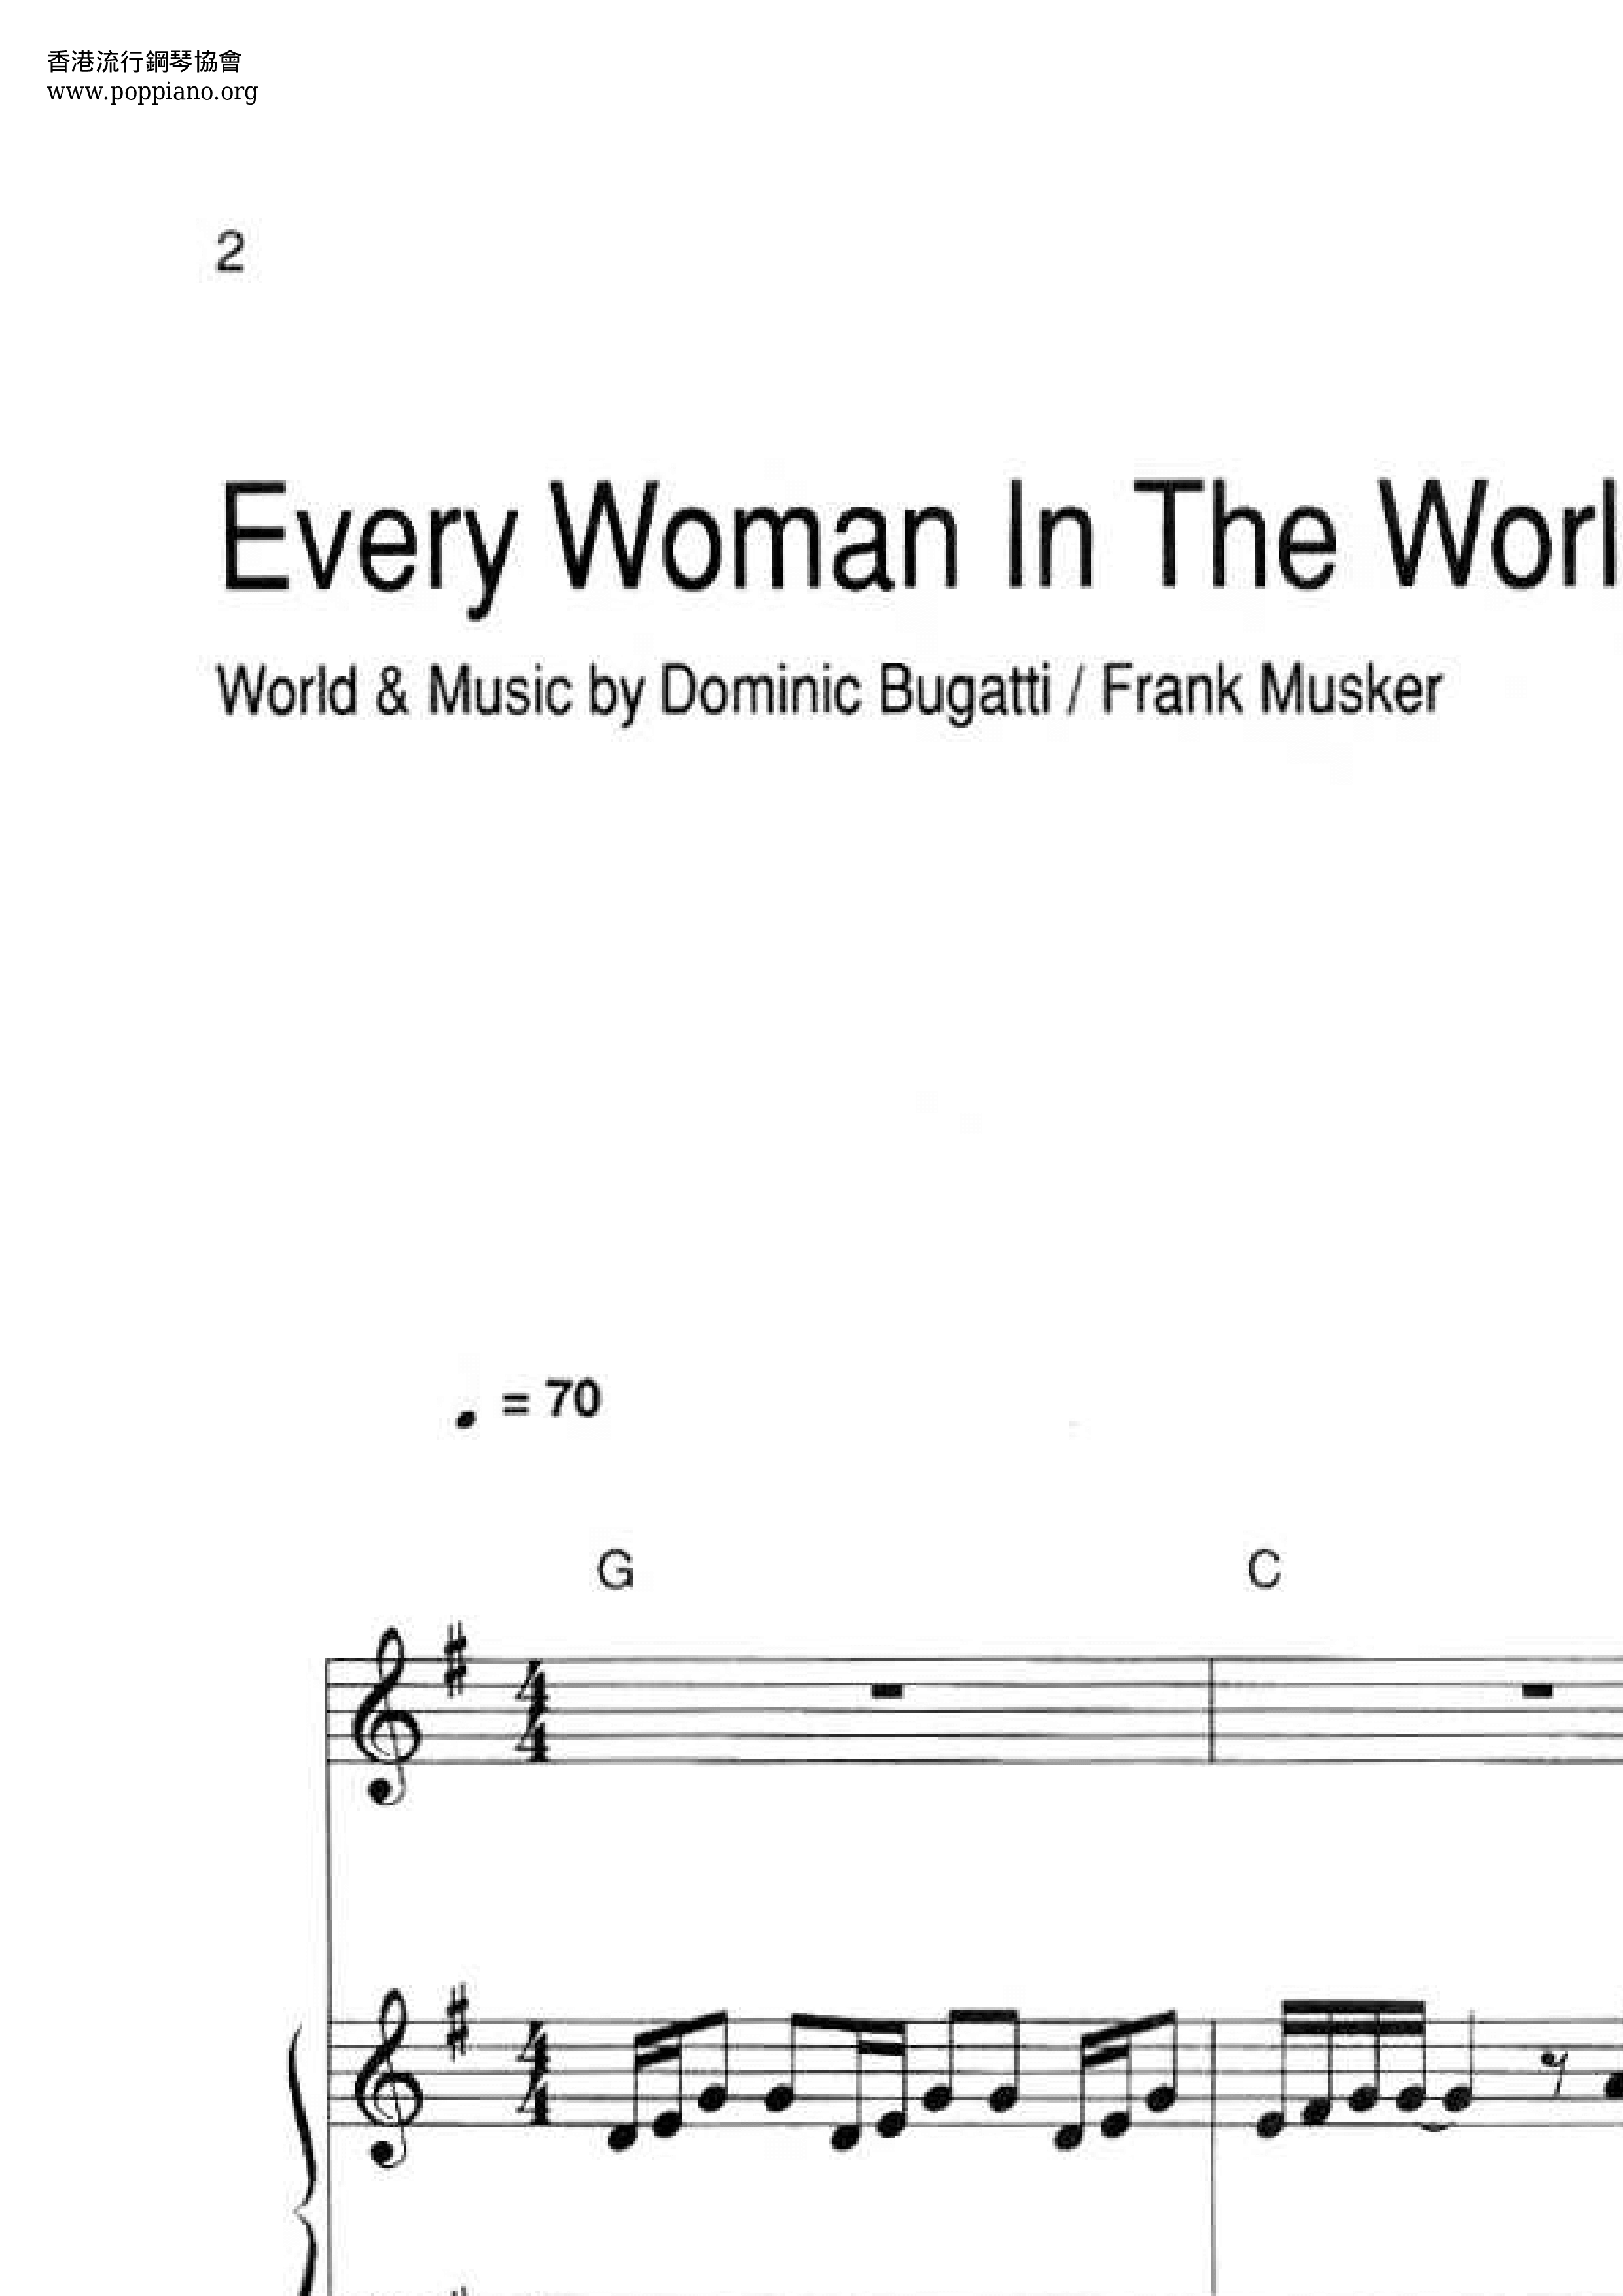 Every Woman In The World Score